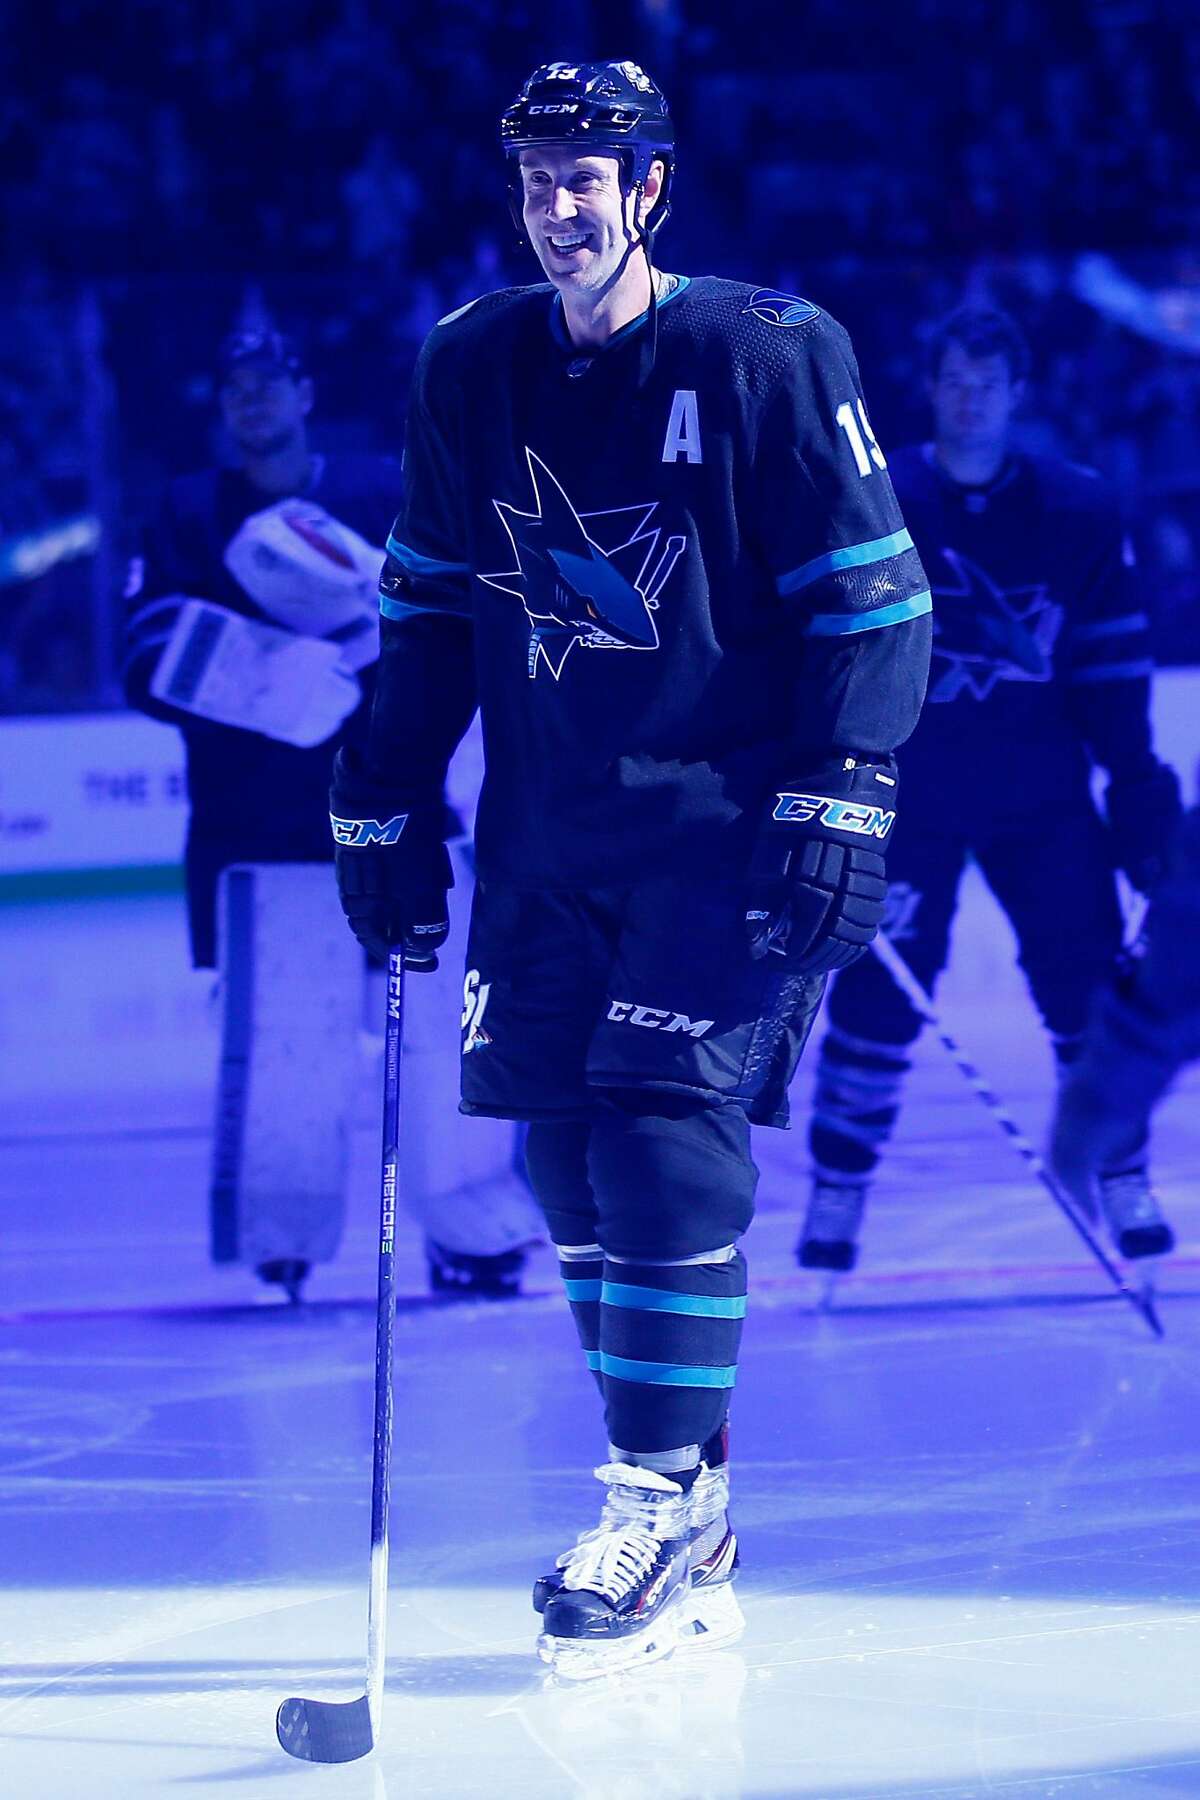 Joe Thornton Era Ends Sharks Longtime Center Signs With Maple Leafs